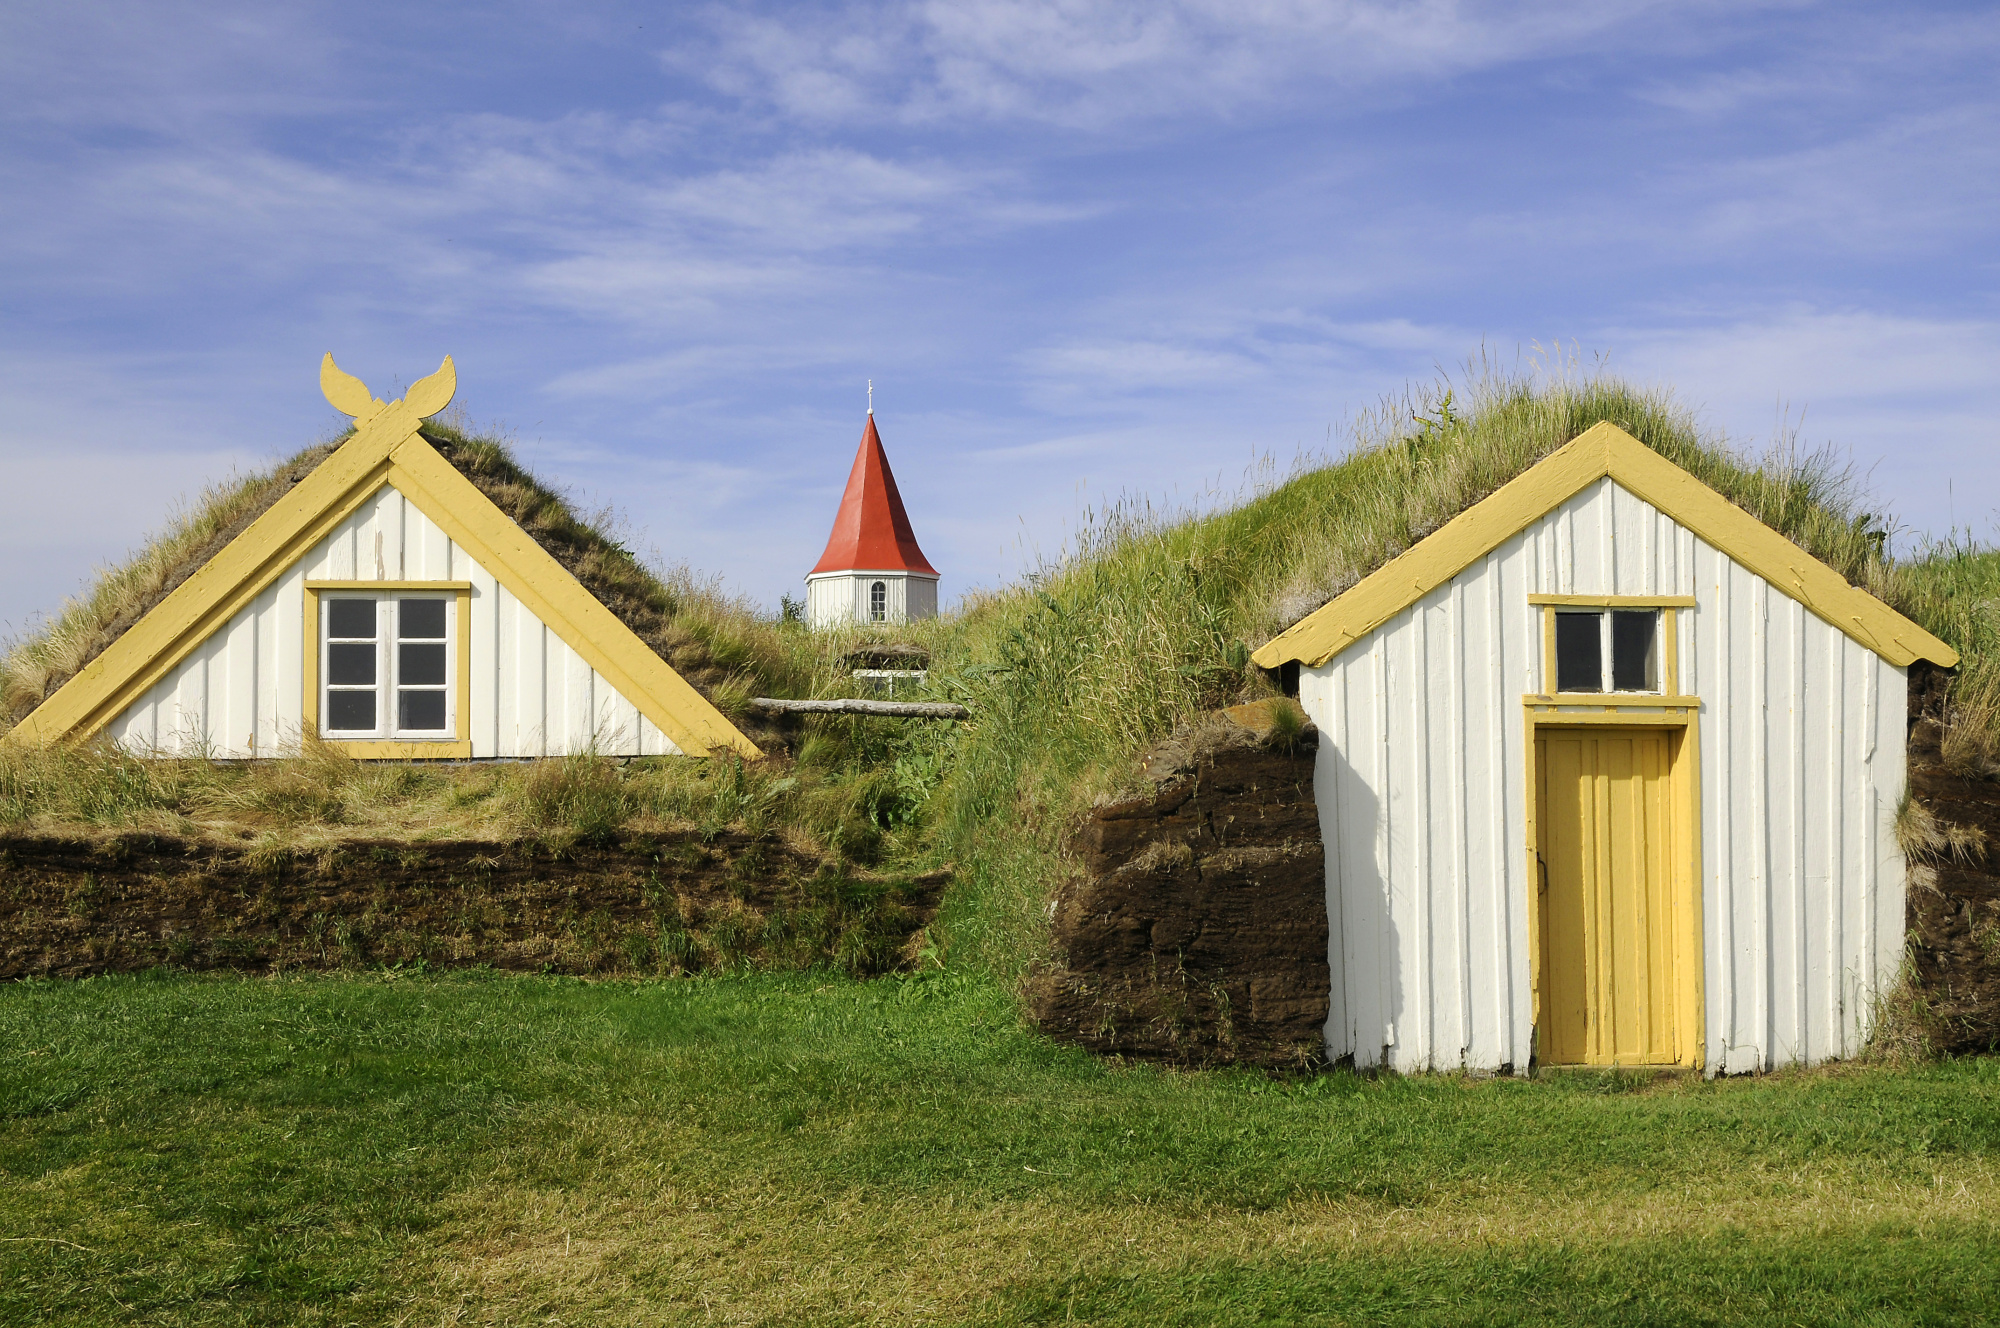 turf-house-2-iceland-s-north-pictures-geography-im-austria-forum